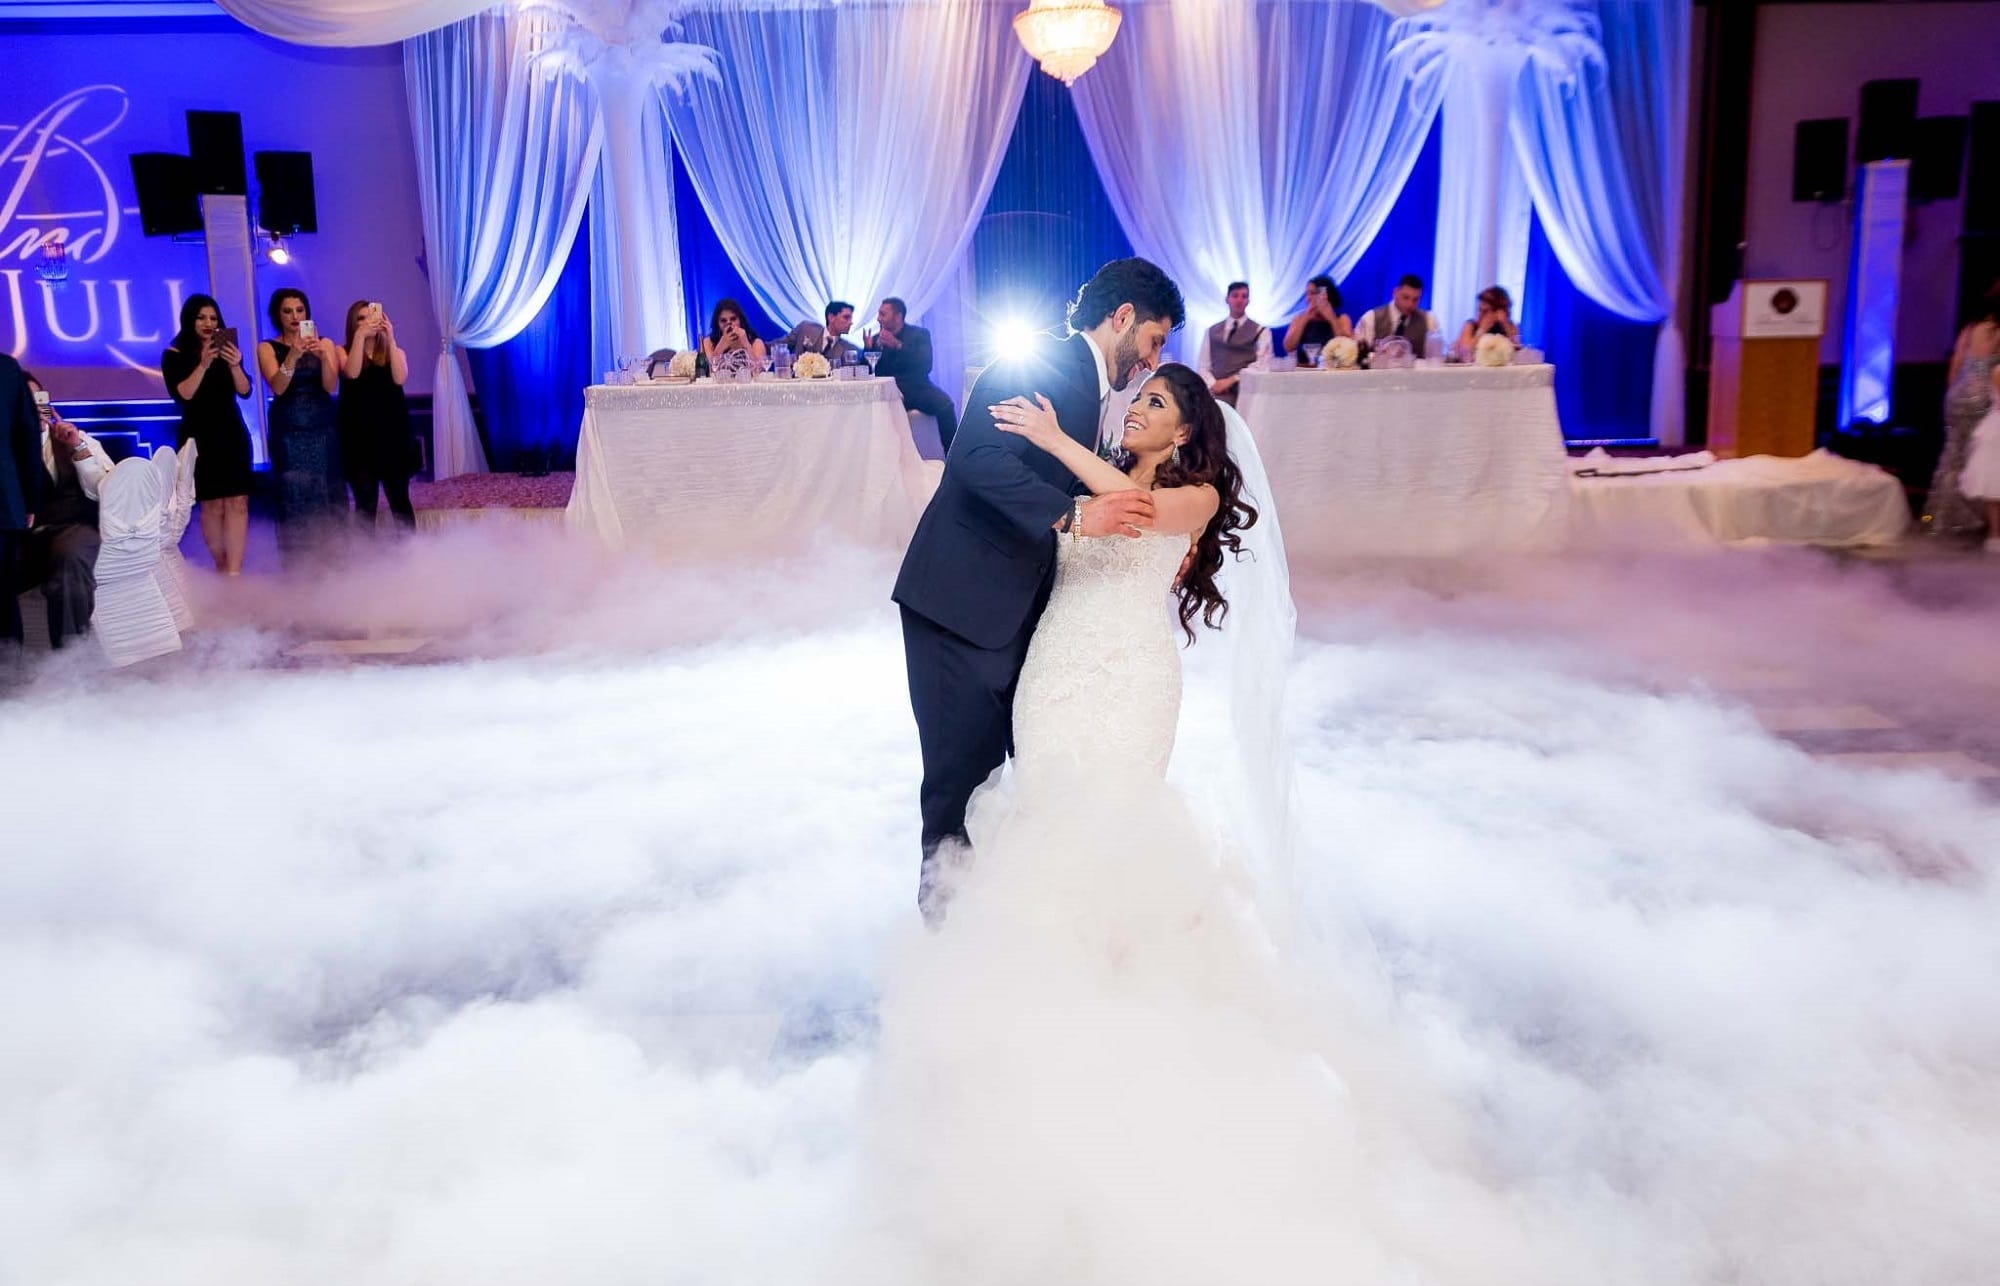 The Best Classic Songs For Your First Dance